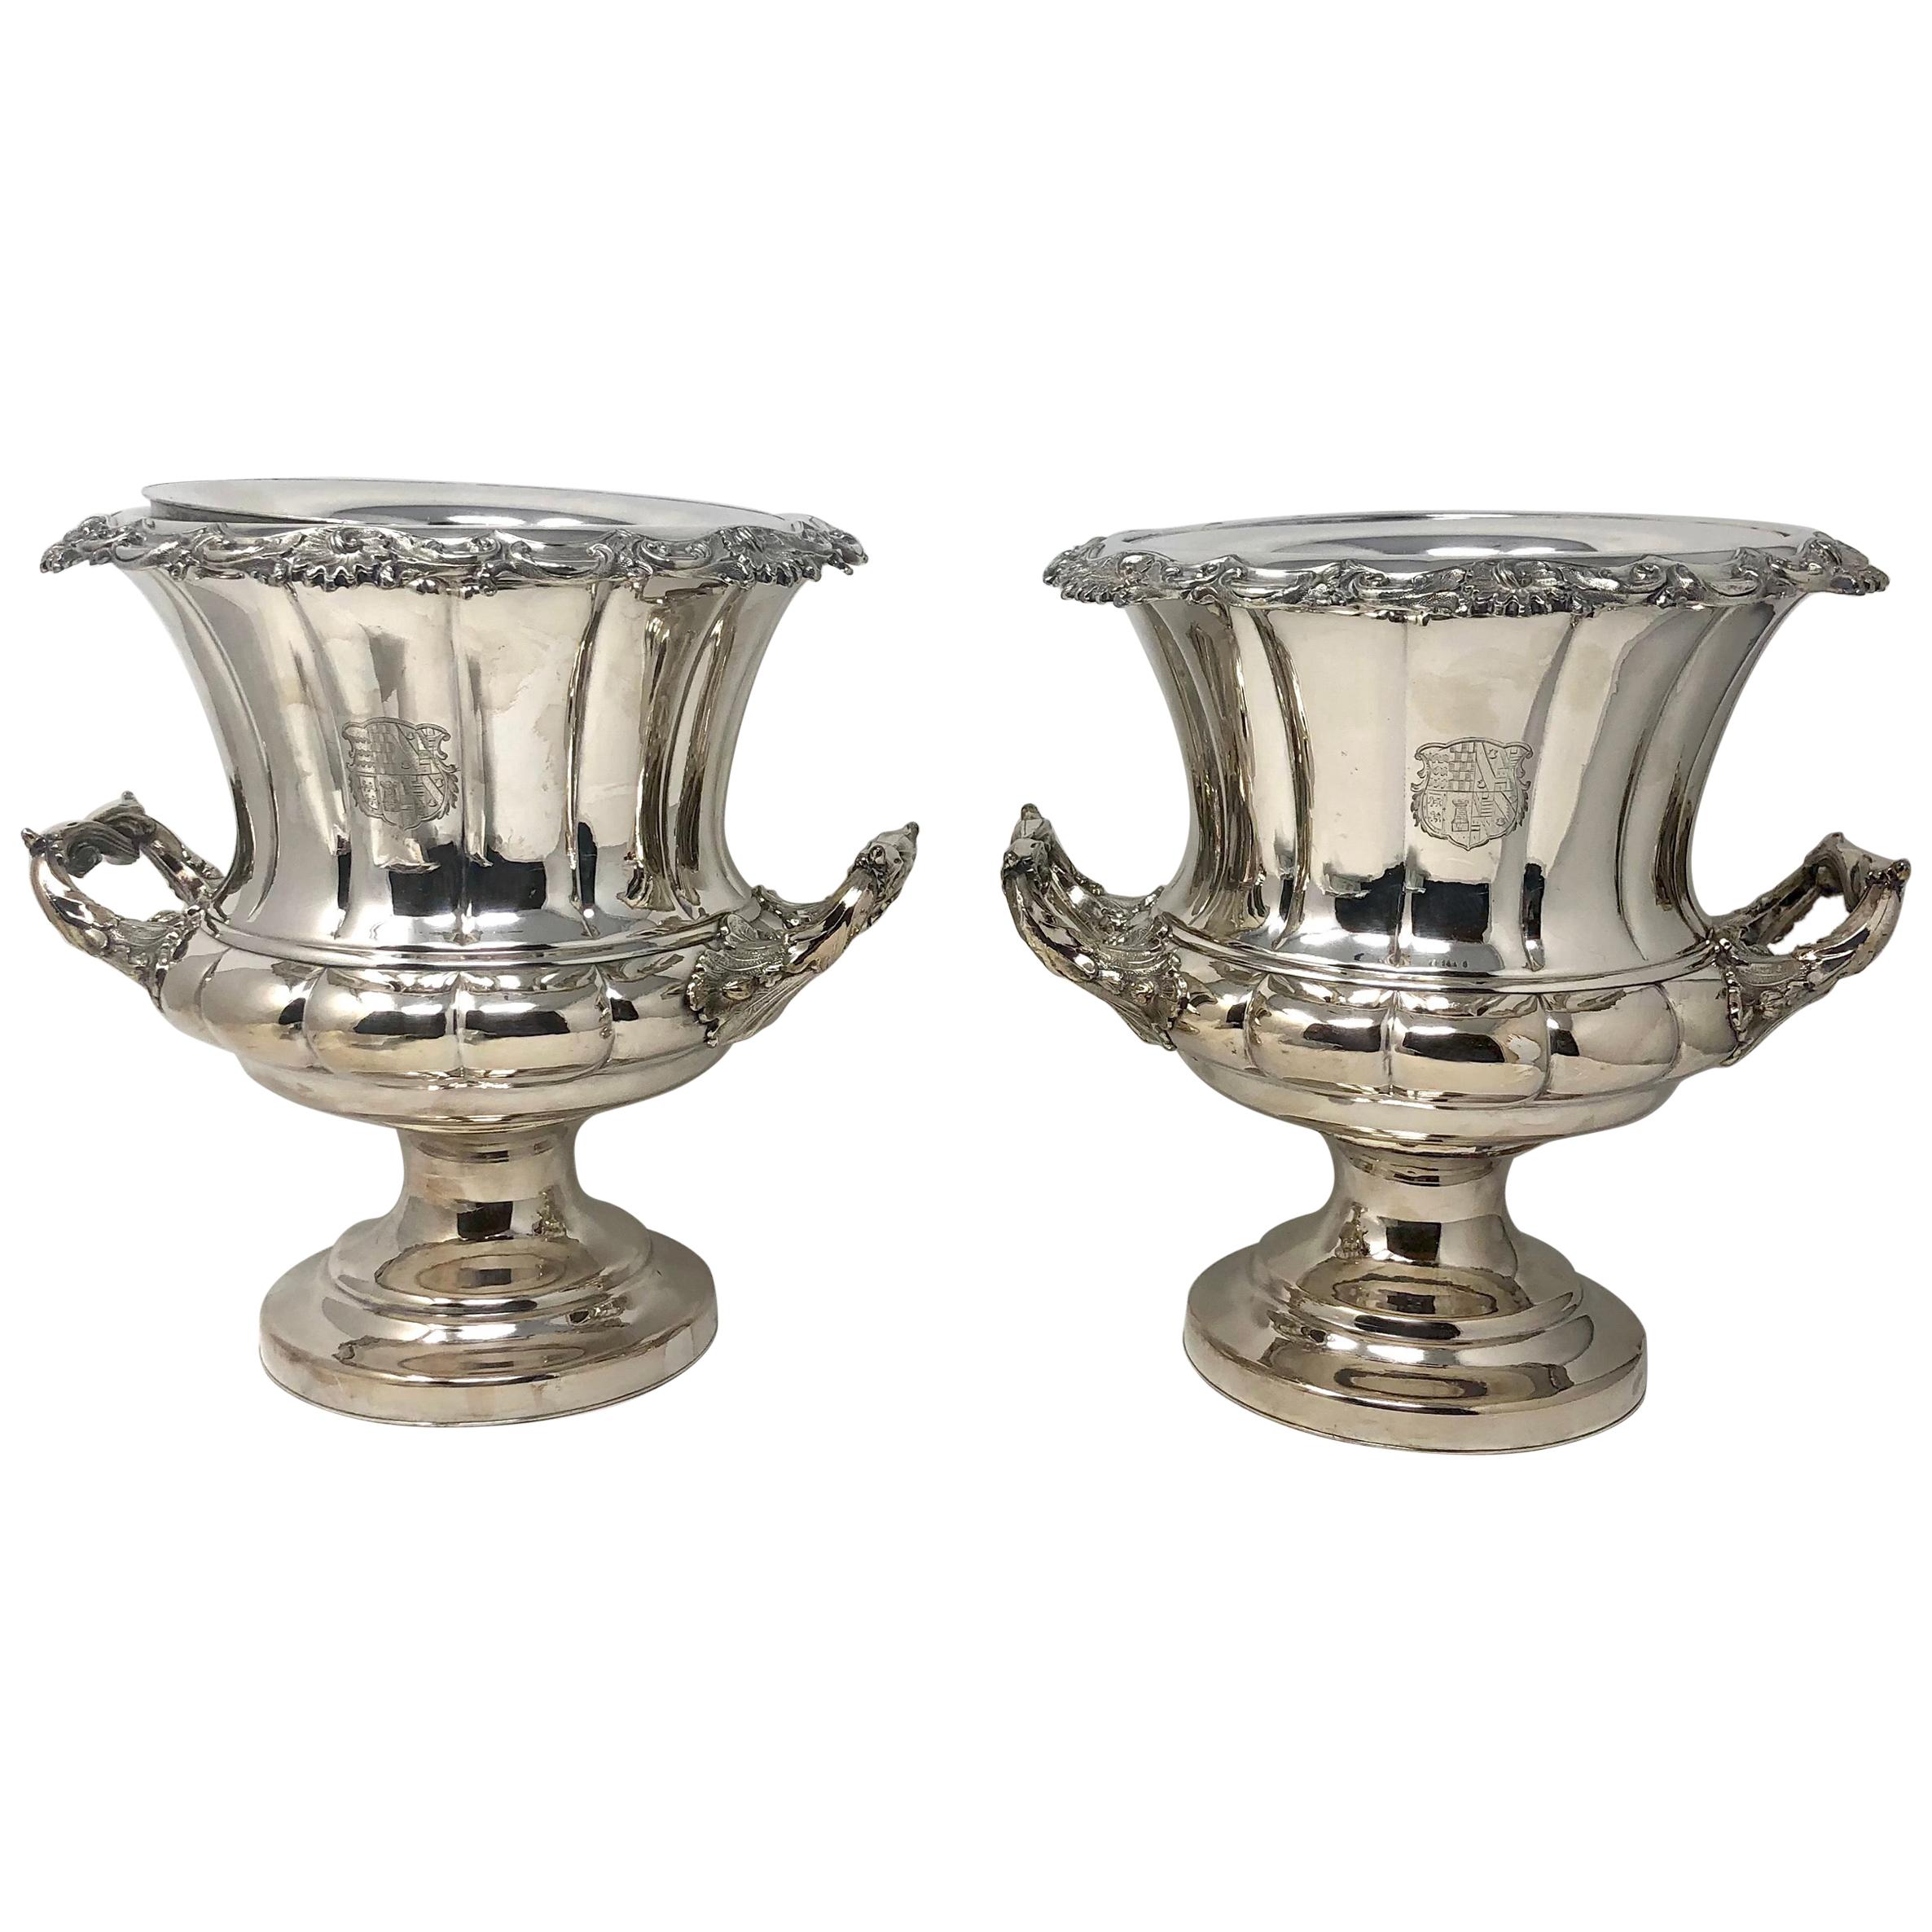 Antique English Sheffield Silver Plated Champagne Buckets, circa 1880-1890, Pair